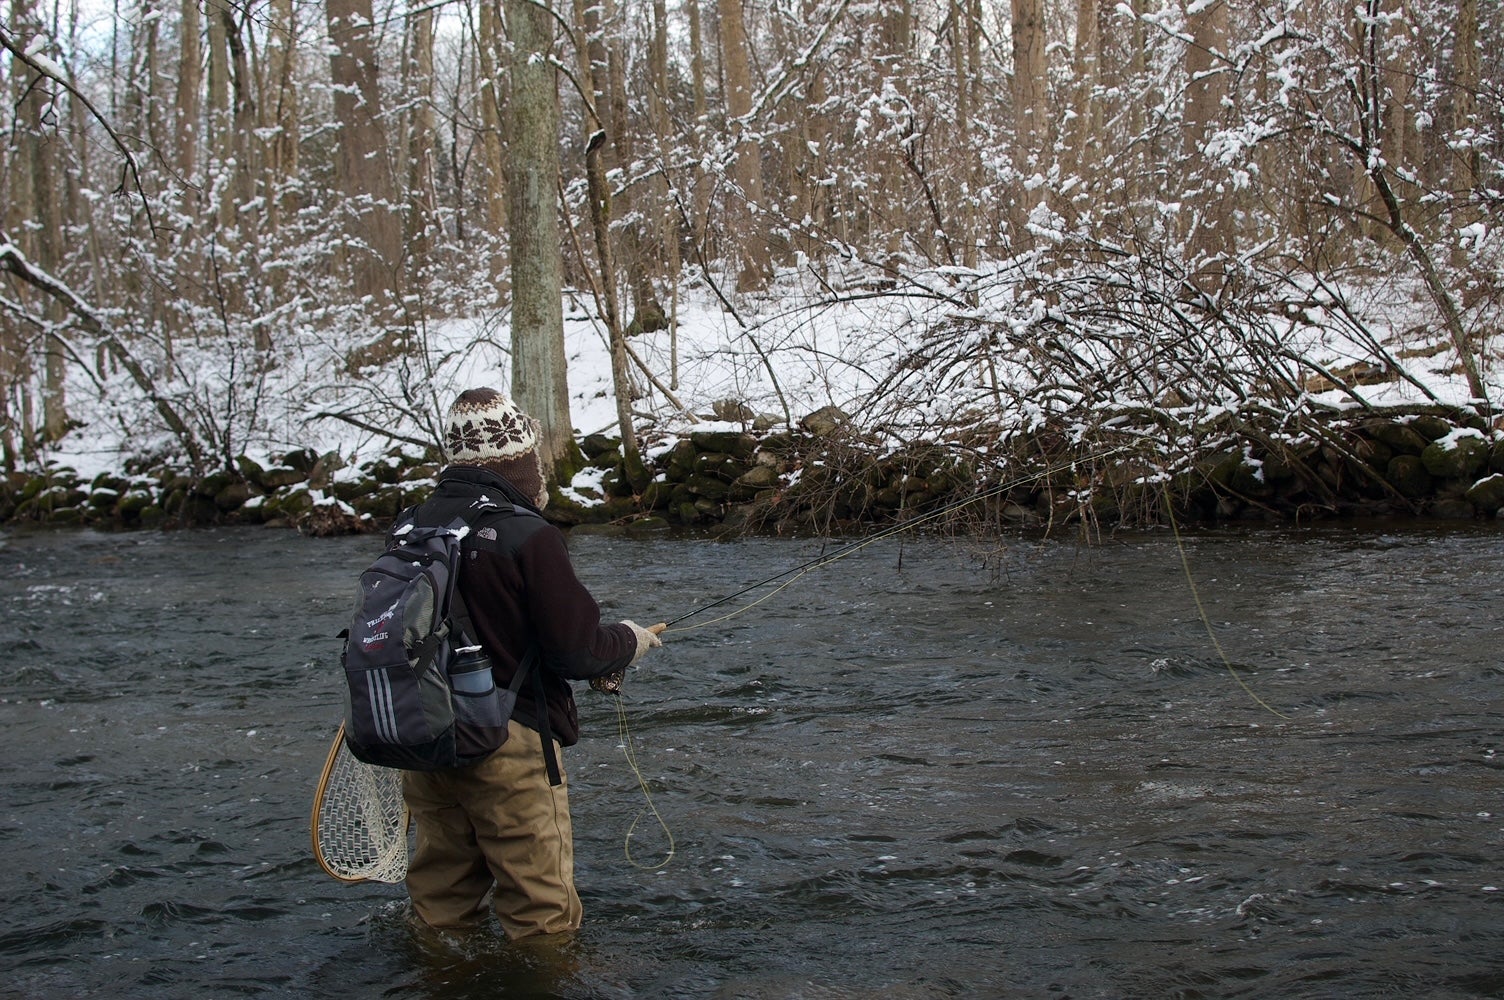 Fly fisherman stand in a river while making a cast with snow covered banks in the backgrond